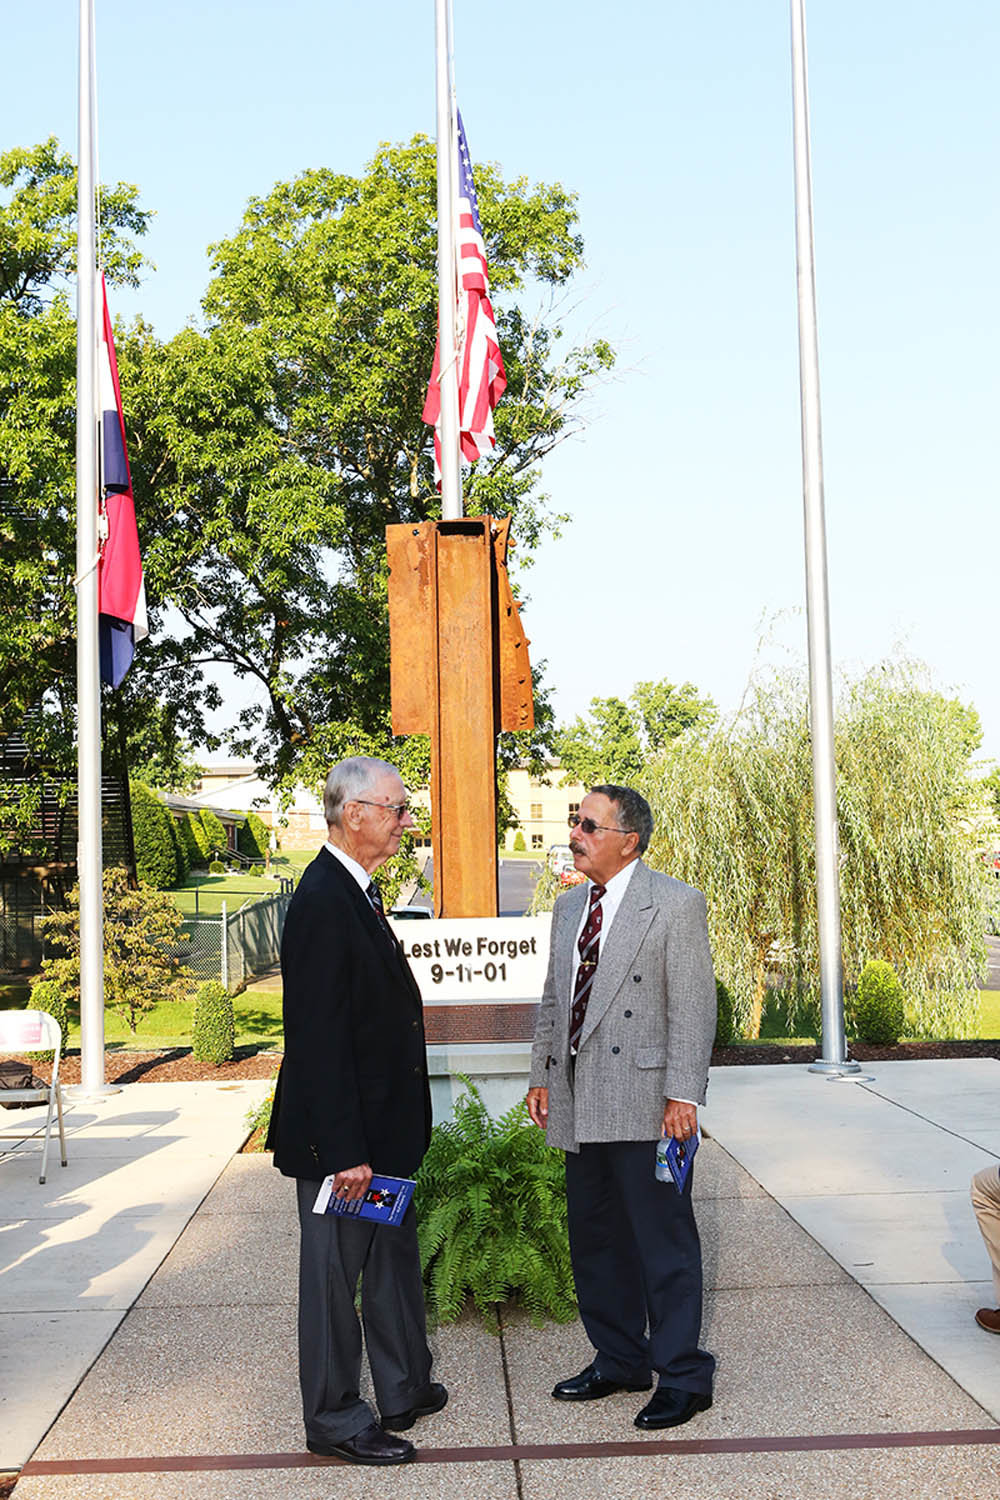 LEST WE FORGET
College of the Ozarks President Jerry Davis, left, visits with guest John Ligato at a Sept. 11 ceremony commemorating the lives lost in the terrorist attacks on the same date 18 years ago. The steel column behind them is a remnant of the World Trade Center and the focal point of the Lest We Forget 9/11 Memorial on the Point Lookout campus.